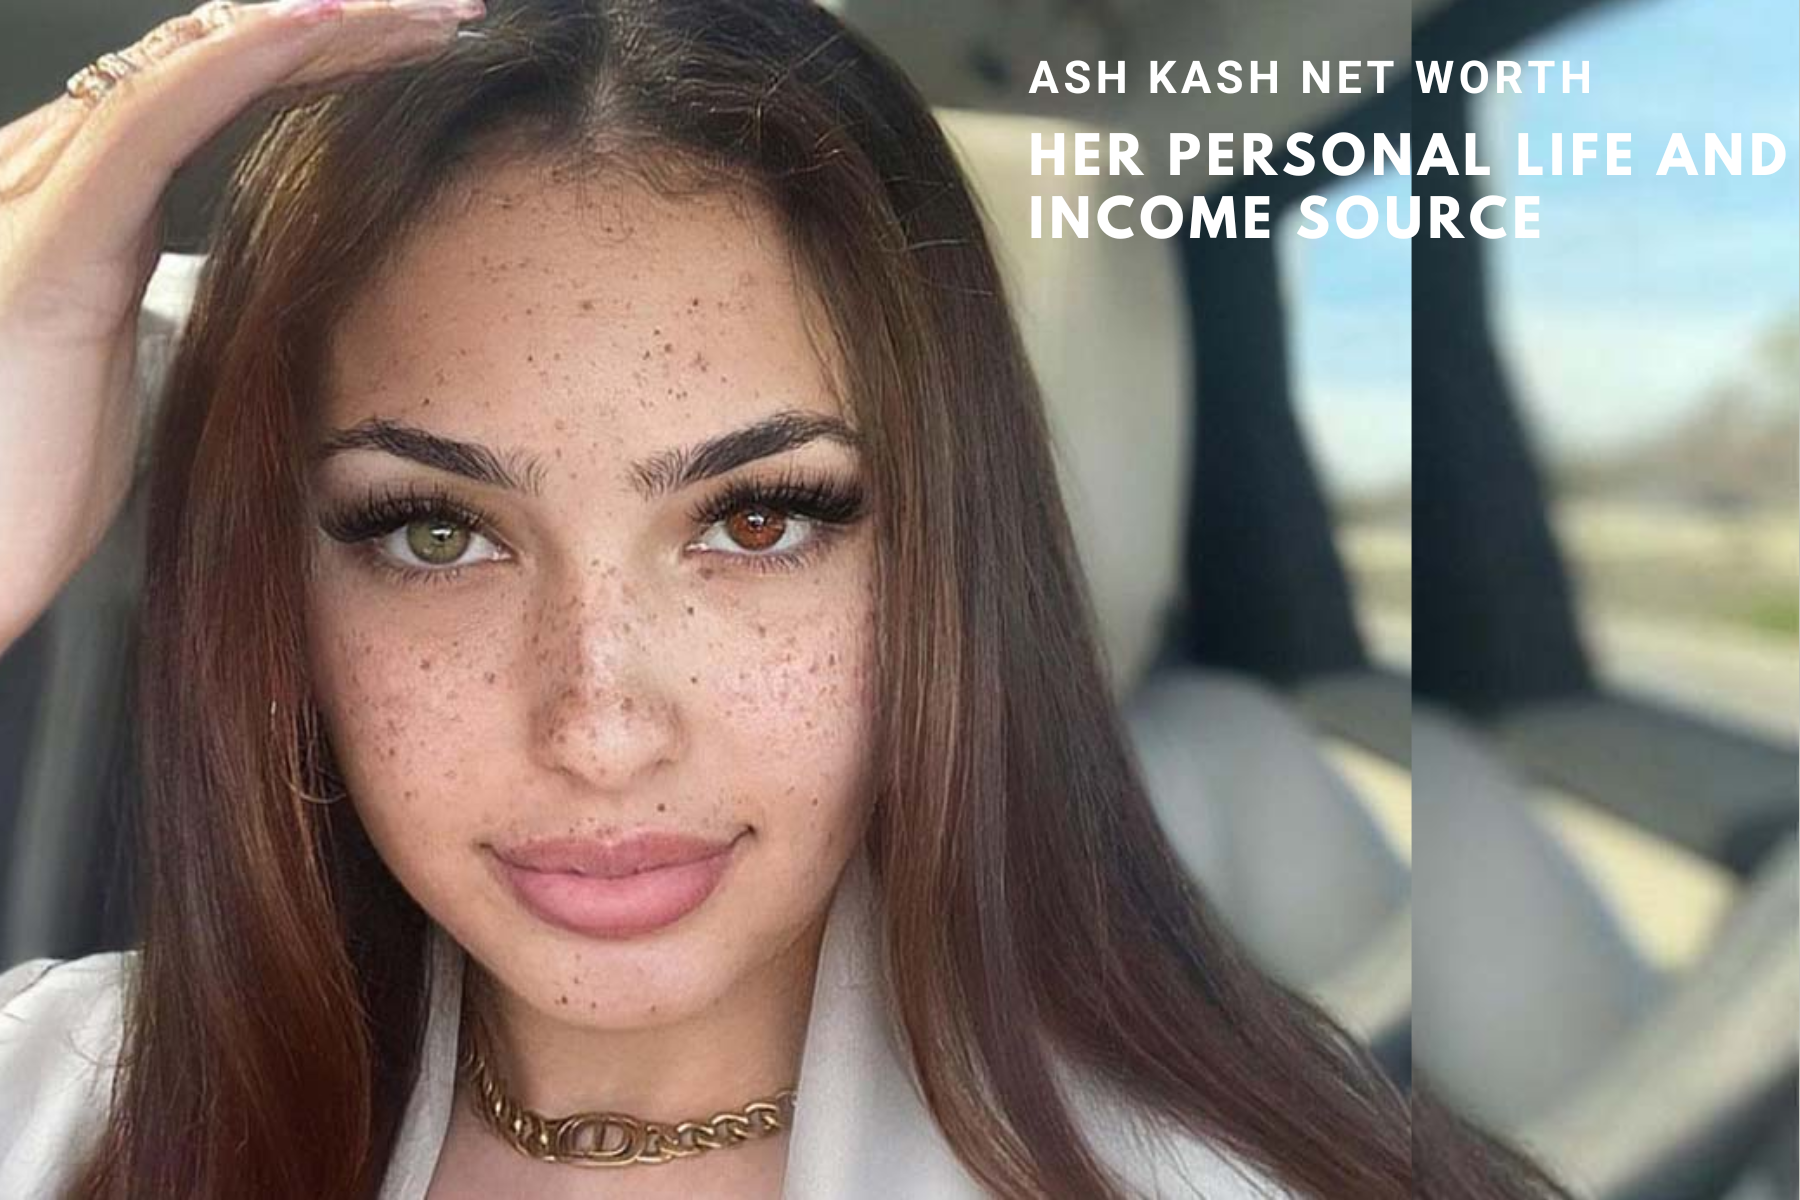 Ash Kash Net Worth - Her Personal Life And Income Source